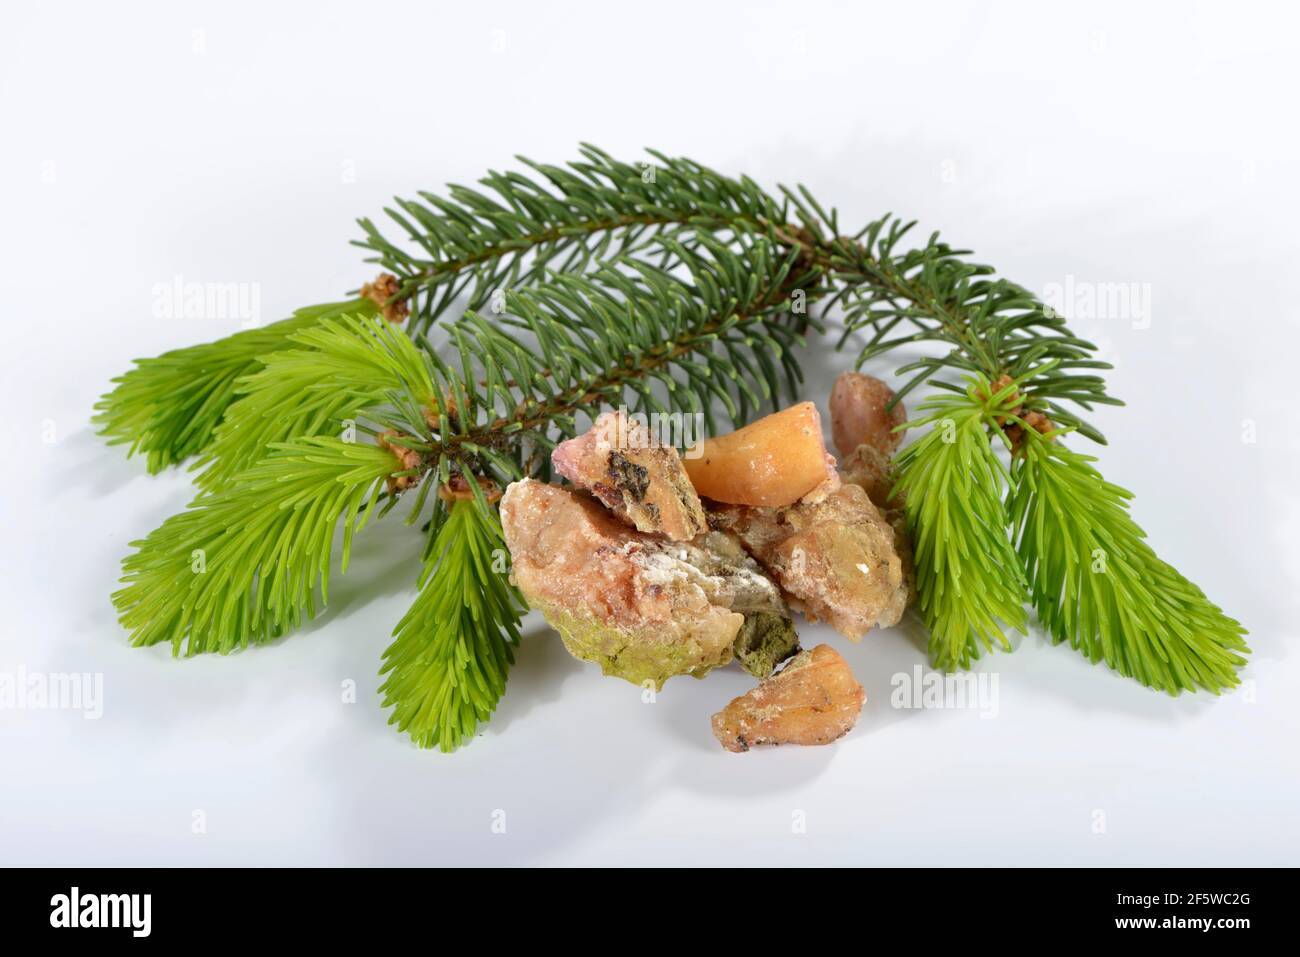 Spruce, spruce resin, spruce branches (Picea abies) Stock Photo